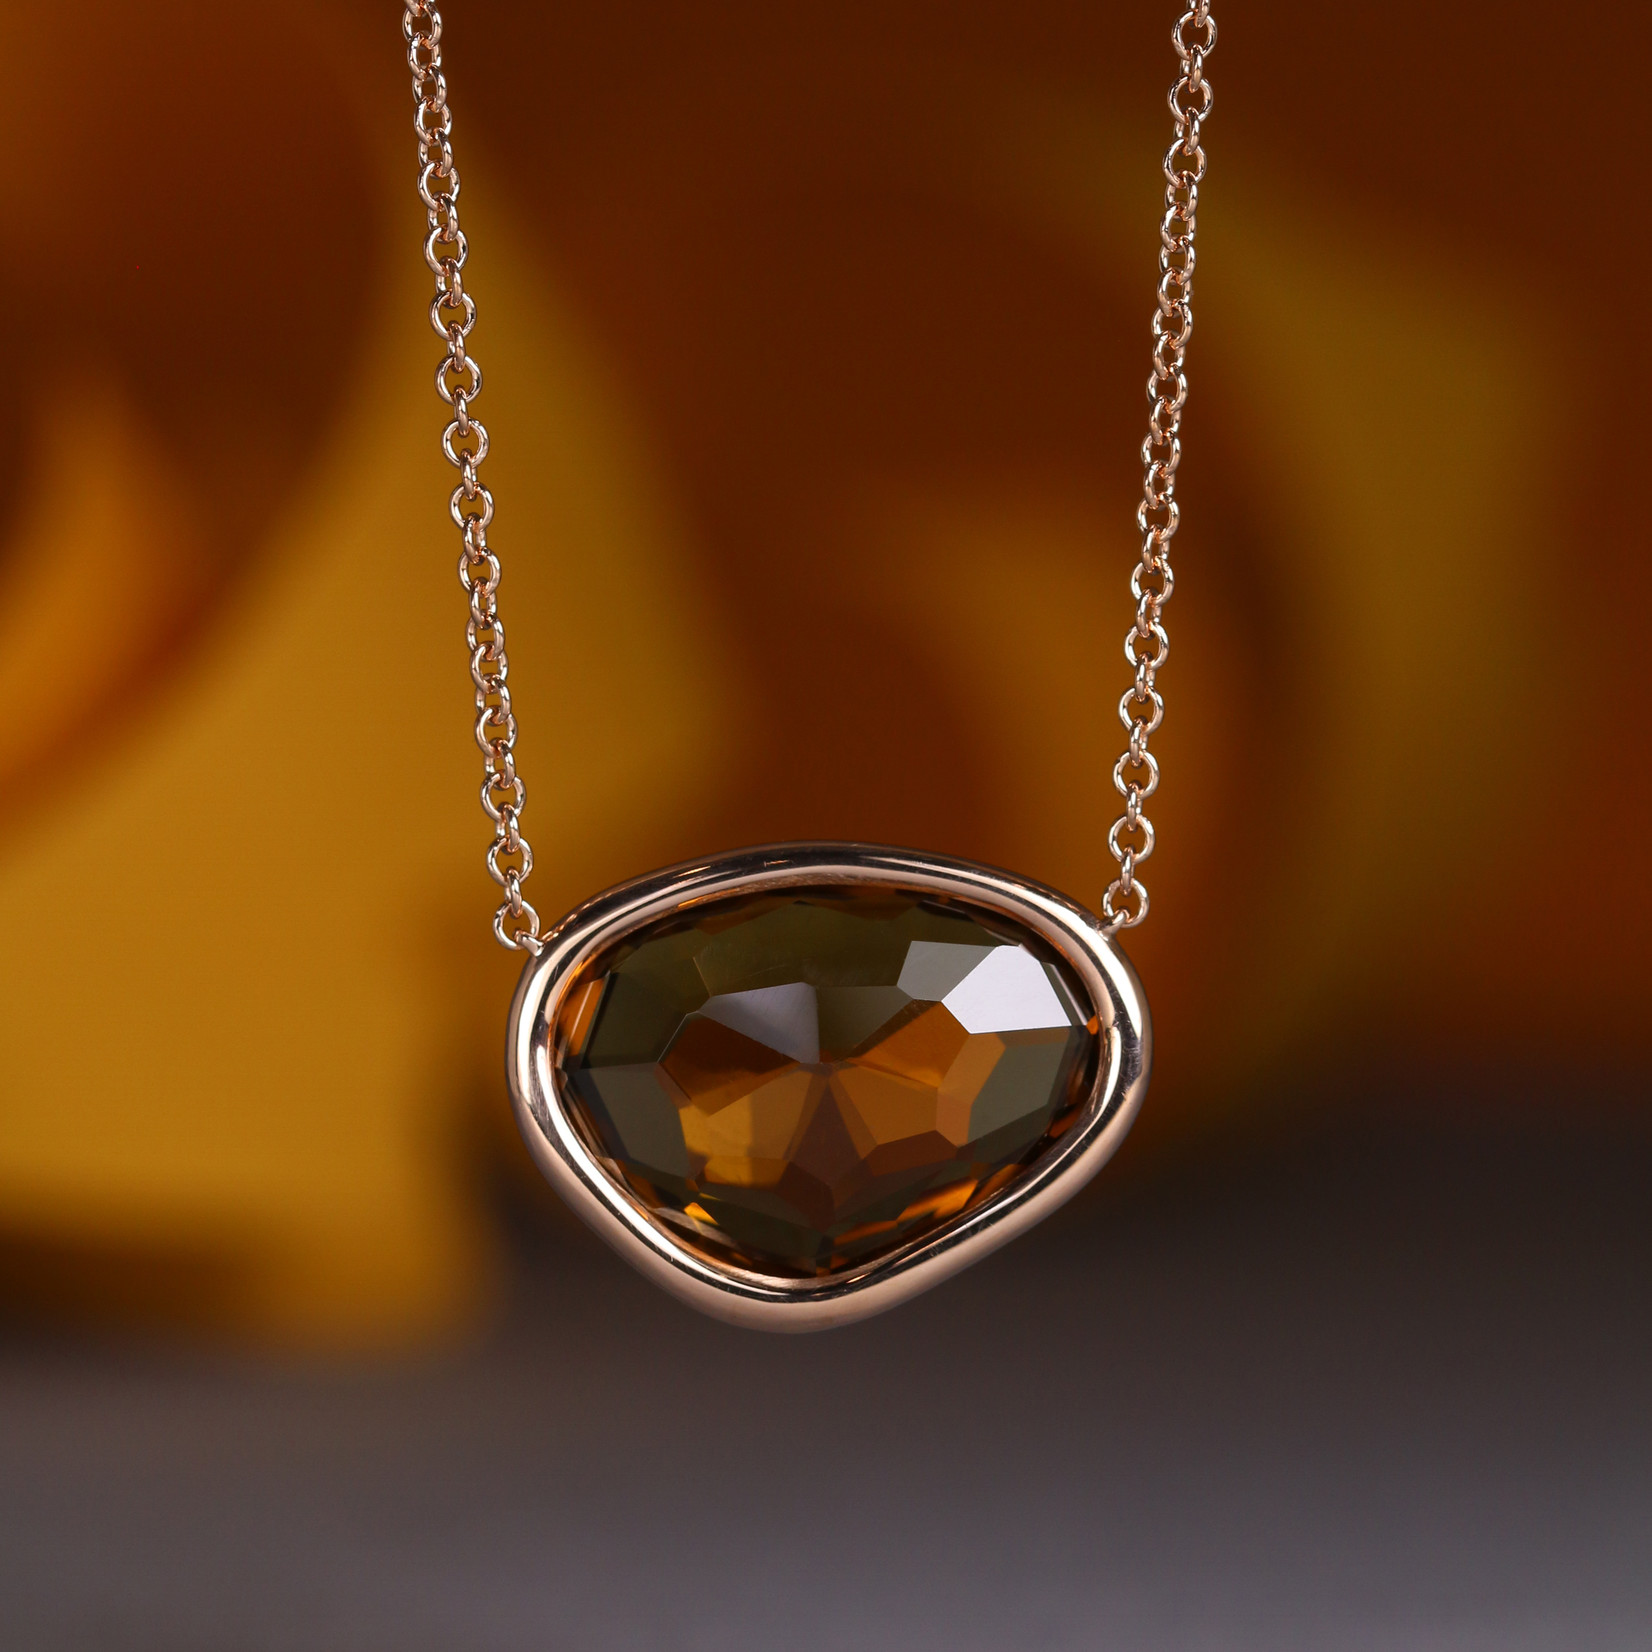 Baxter Moerman Piedras Necklace with Whiskey Quartz